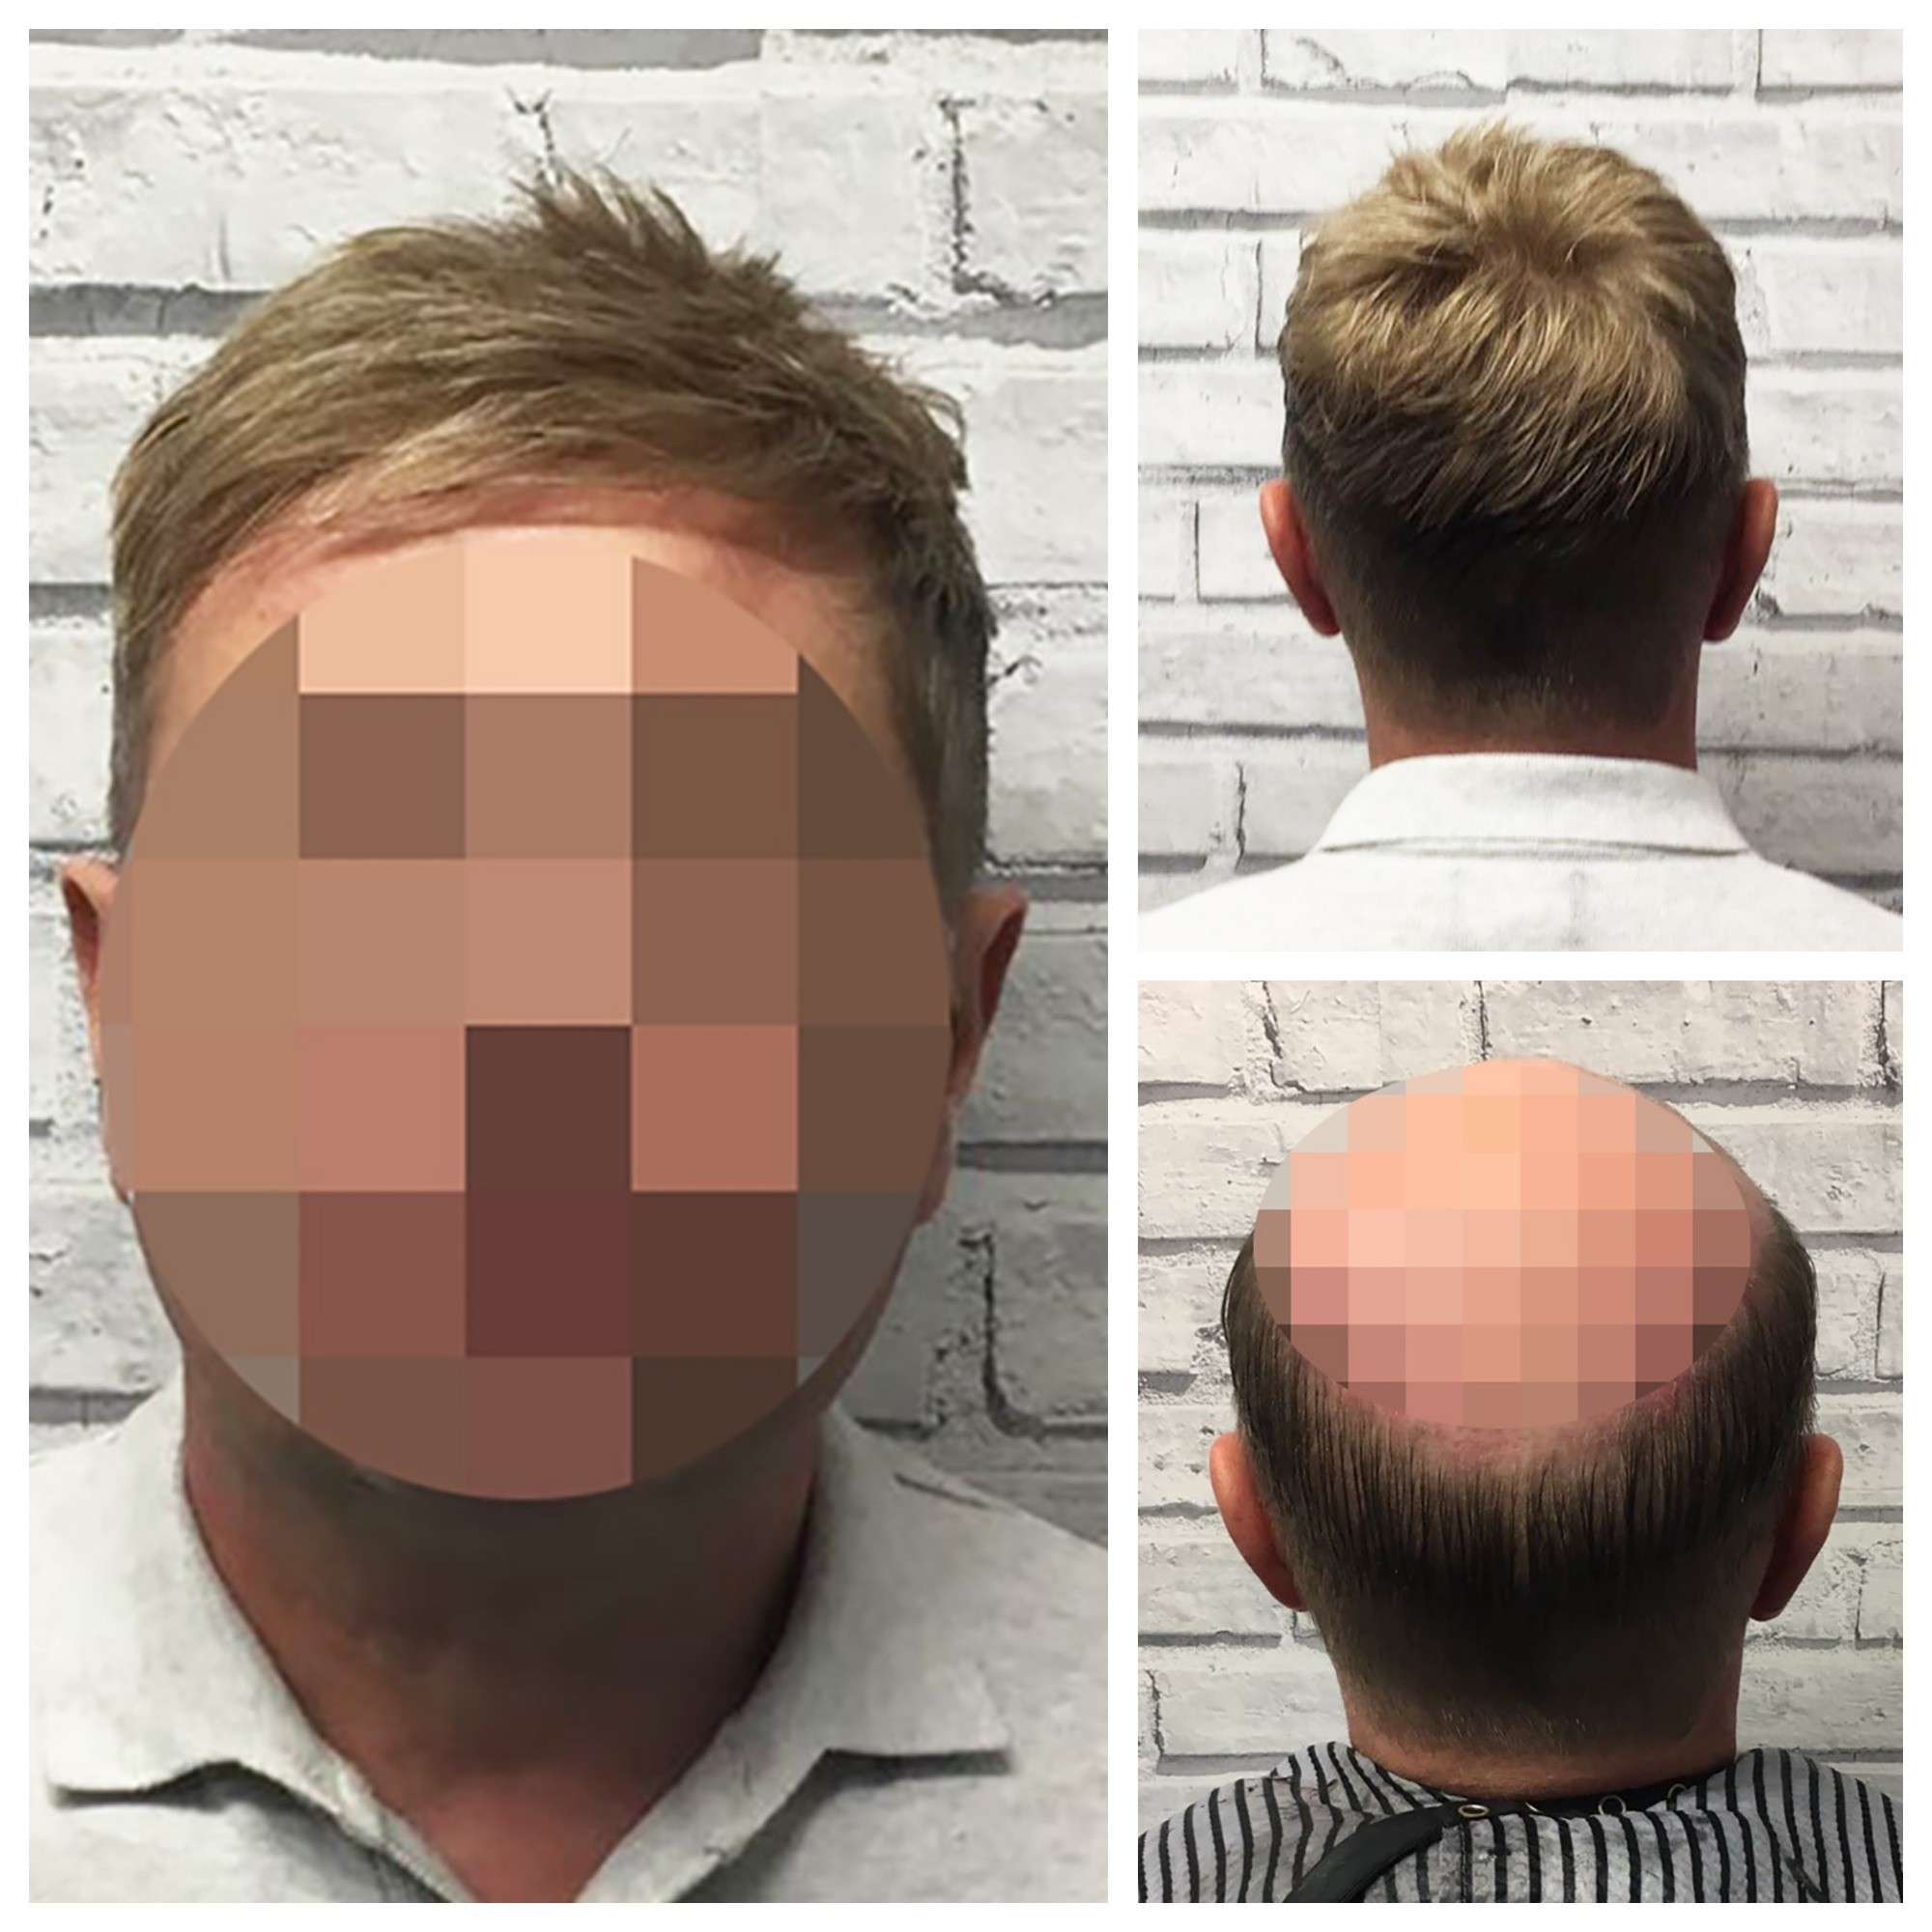 Hair Systems Manchester Specialist non surgical hair loss replacement